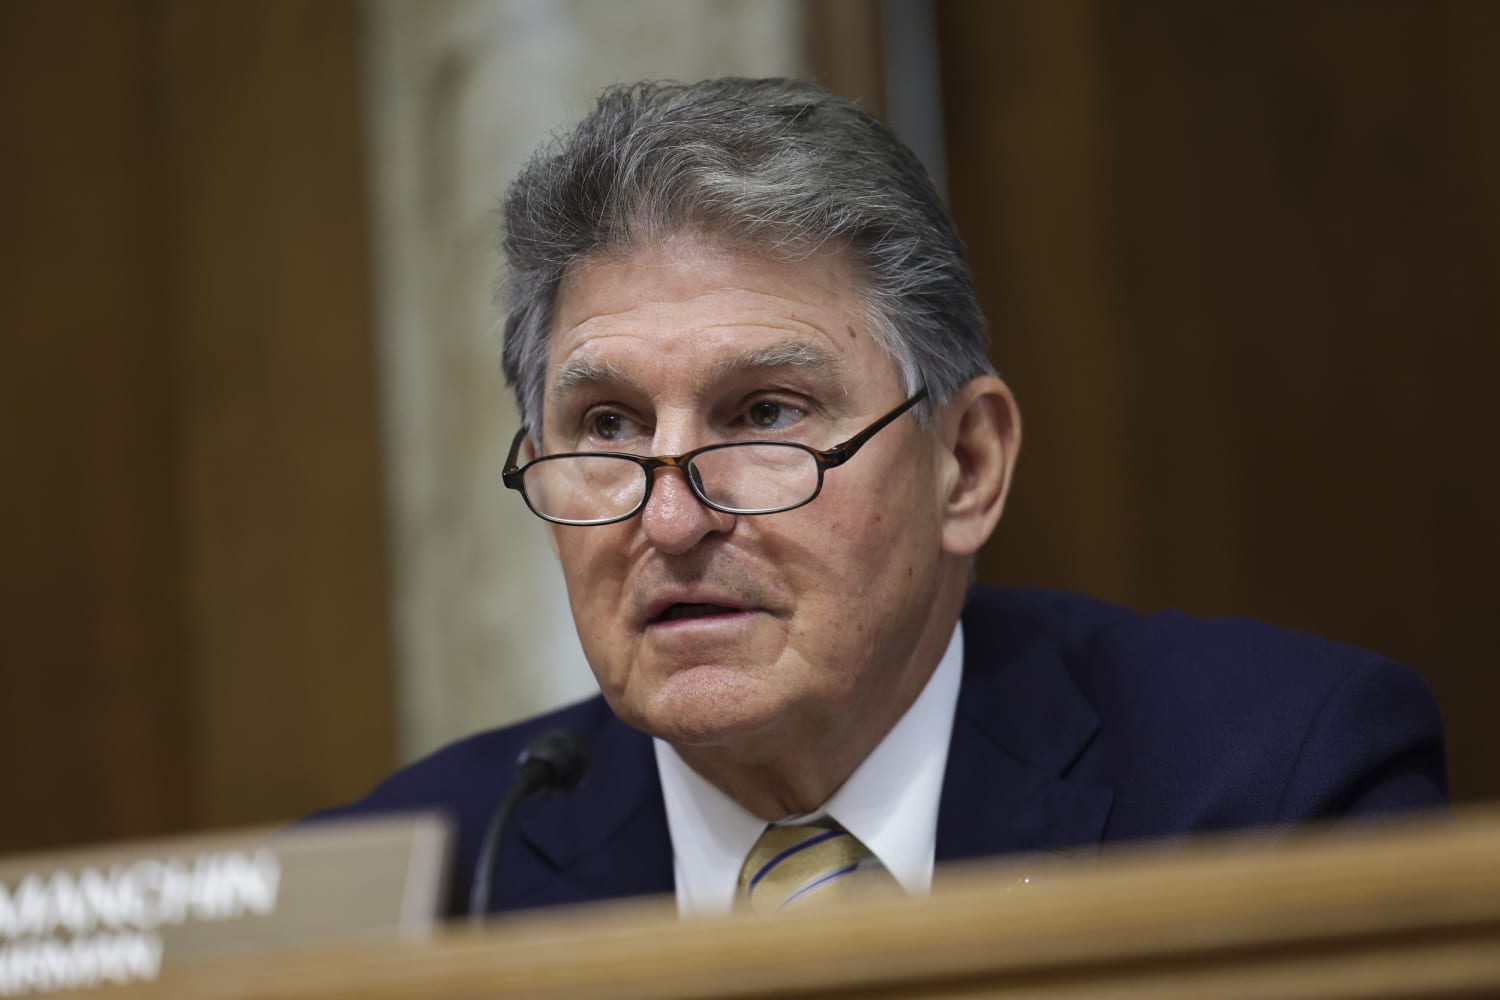 Democrats vent their fury as Joe Manchin shelves action on climate change